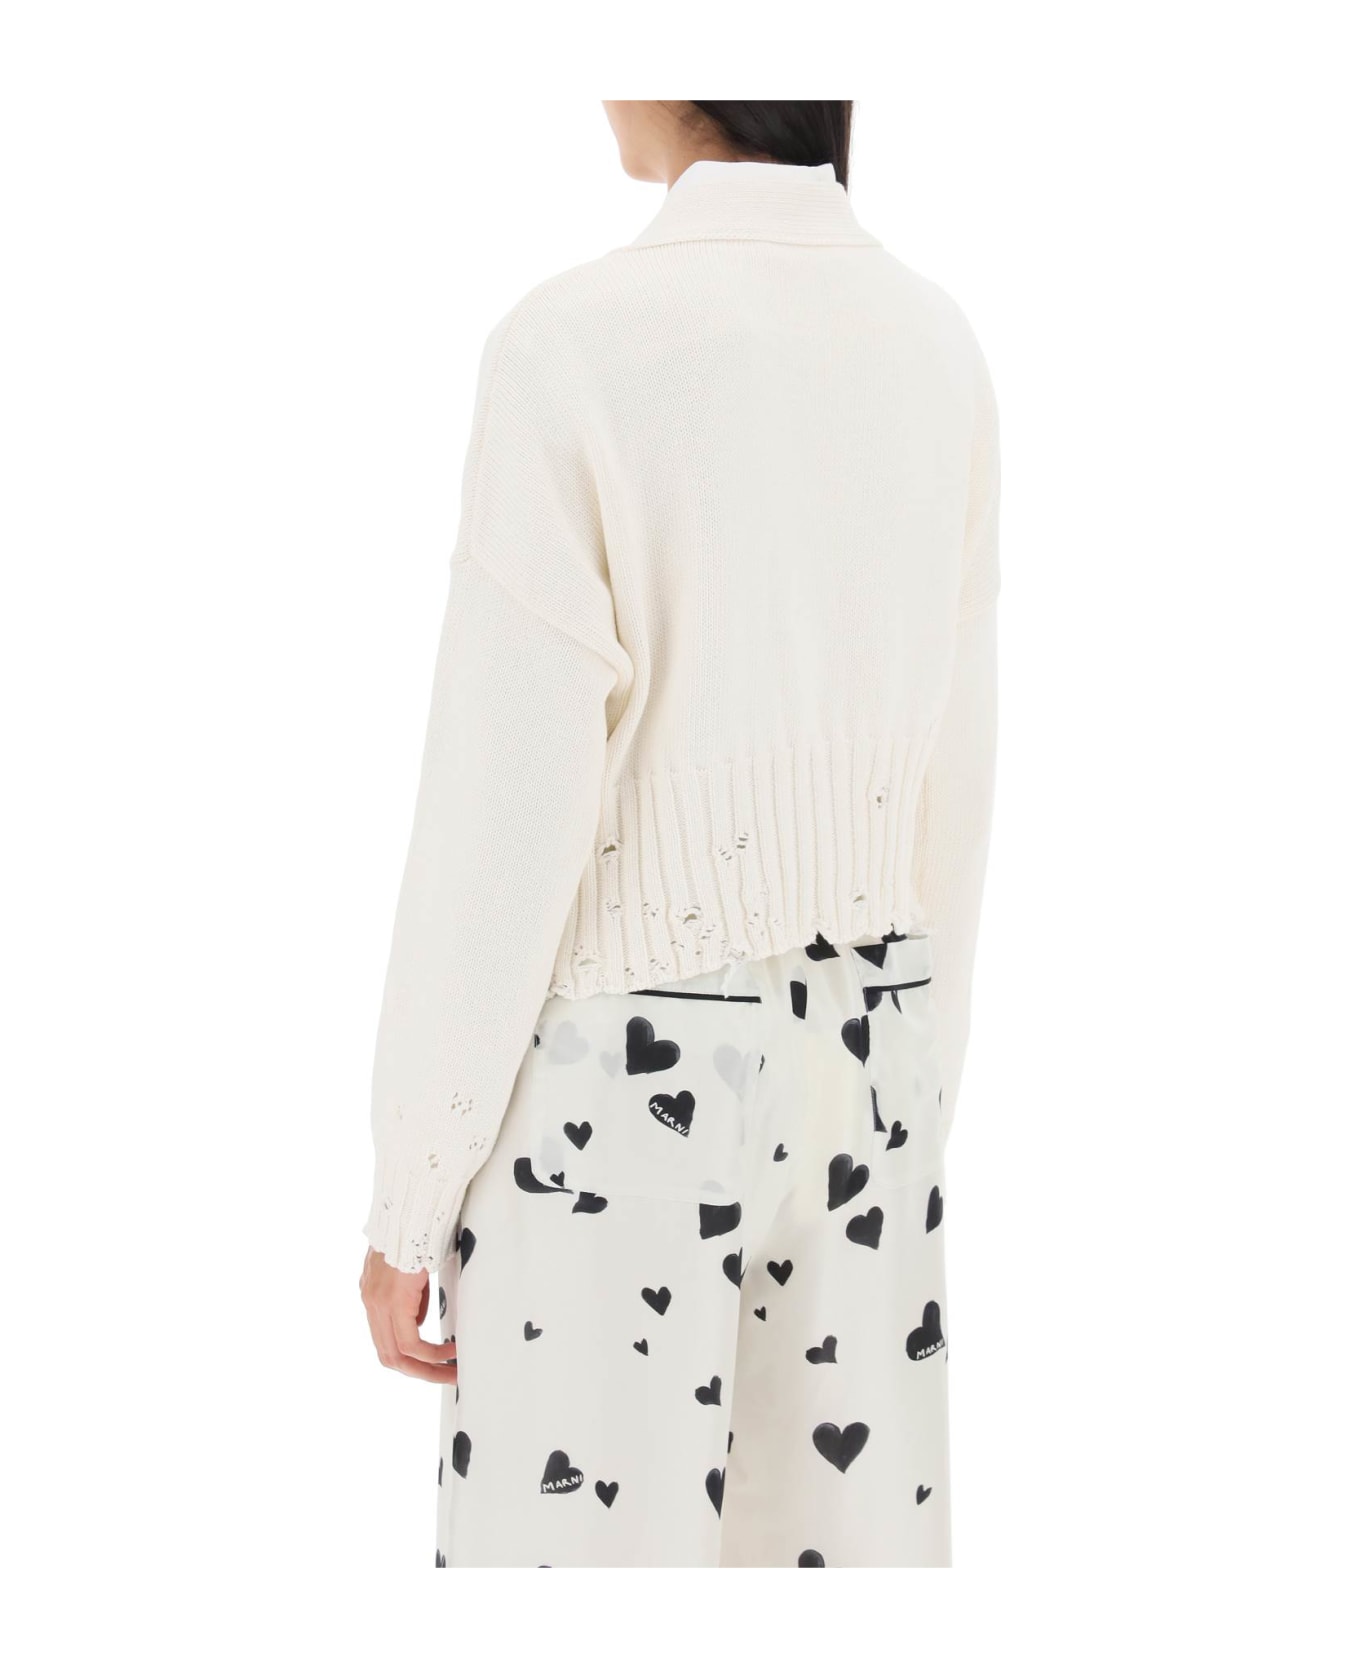 Marni Short Cardigan With White Cotton Wears - LILY WHITE (White) カーディガン